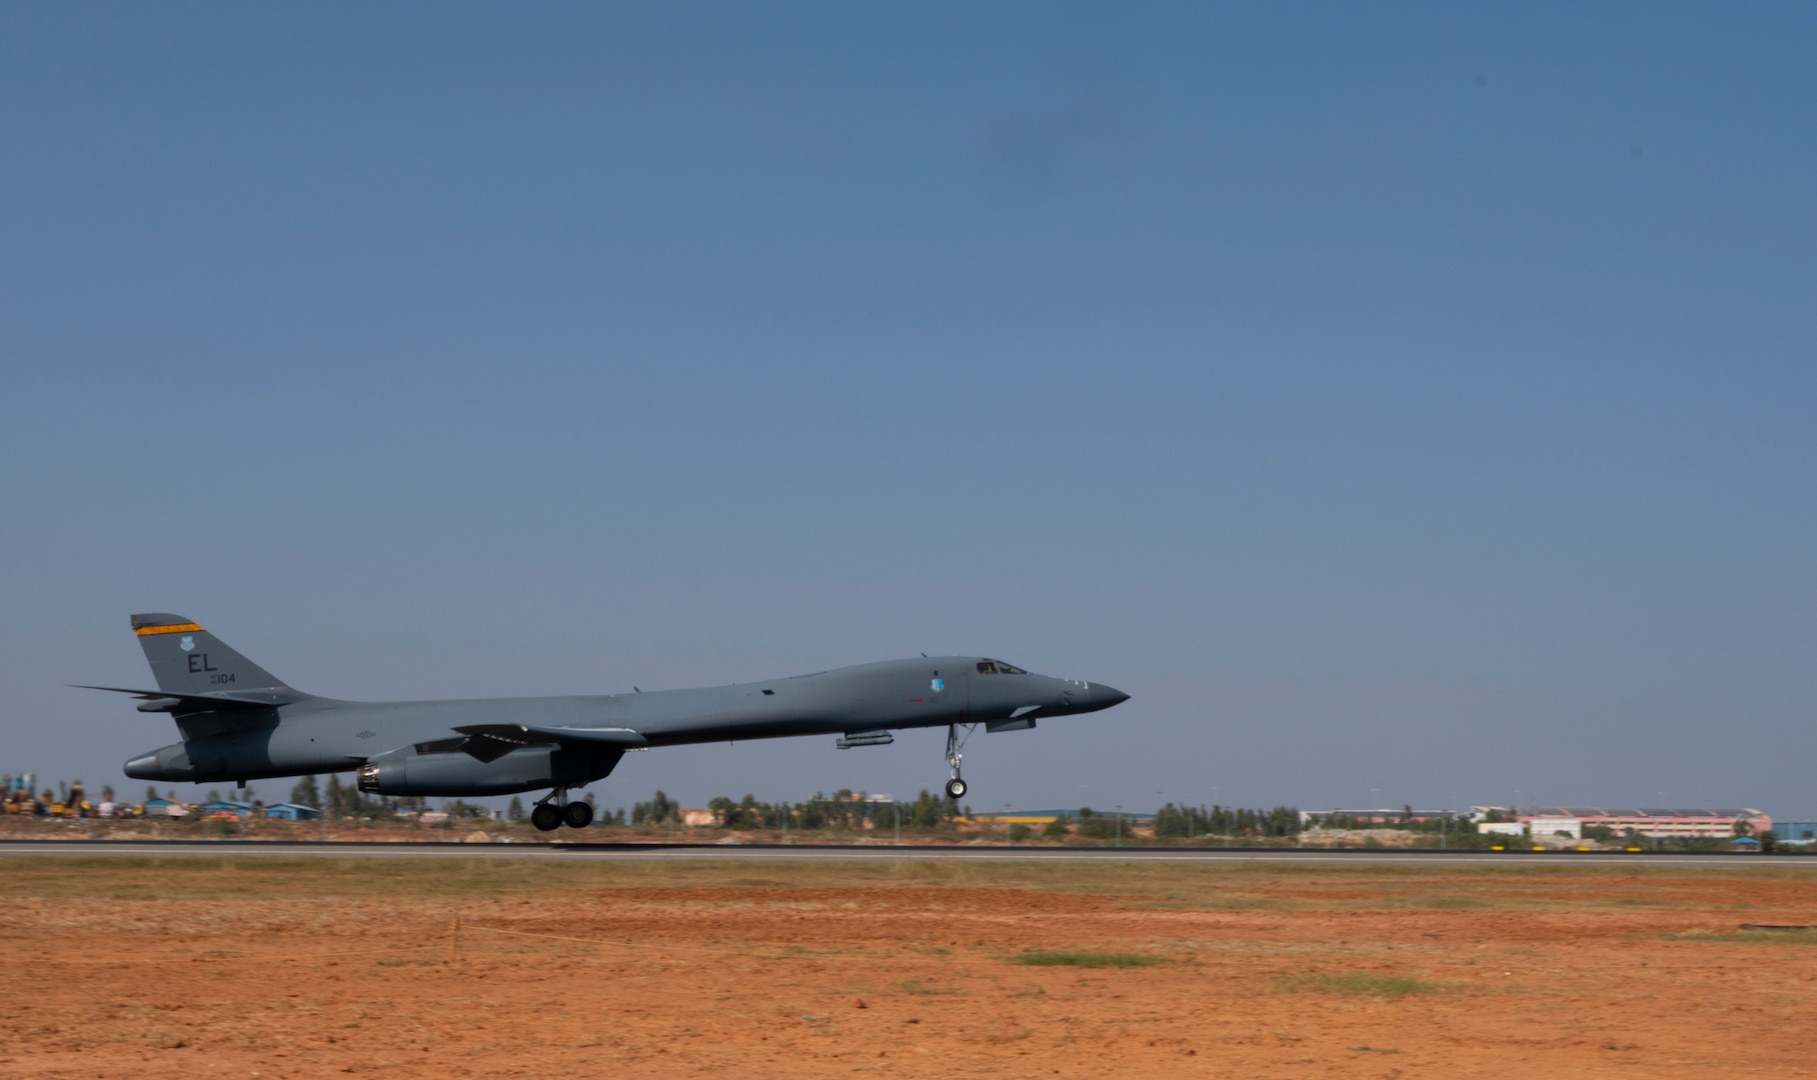 A B-1B Lancer assigned to the 34th Expeditionary Bomb Squadron, Ellsworth Air Force Base, S.D., lands at Kempegowda International Airport in Bengaluru, India, following a 26-hour sortie, Feb. 1, 2021. The B-1 is a multi-role, long-range bomber capable of carrying the largest conventional payload of both guided and unguided weapons in the U.S. Air Force inventory. (U.S. Air Force photo by Senior Airman Christina Bennett)